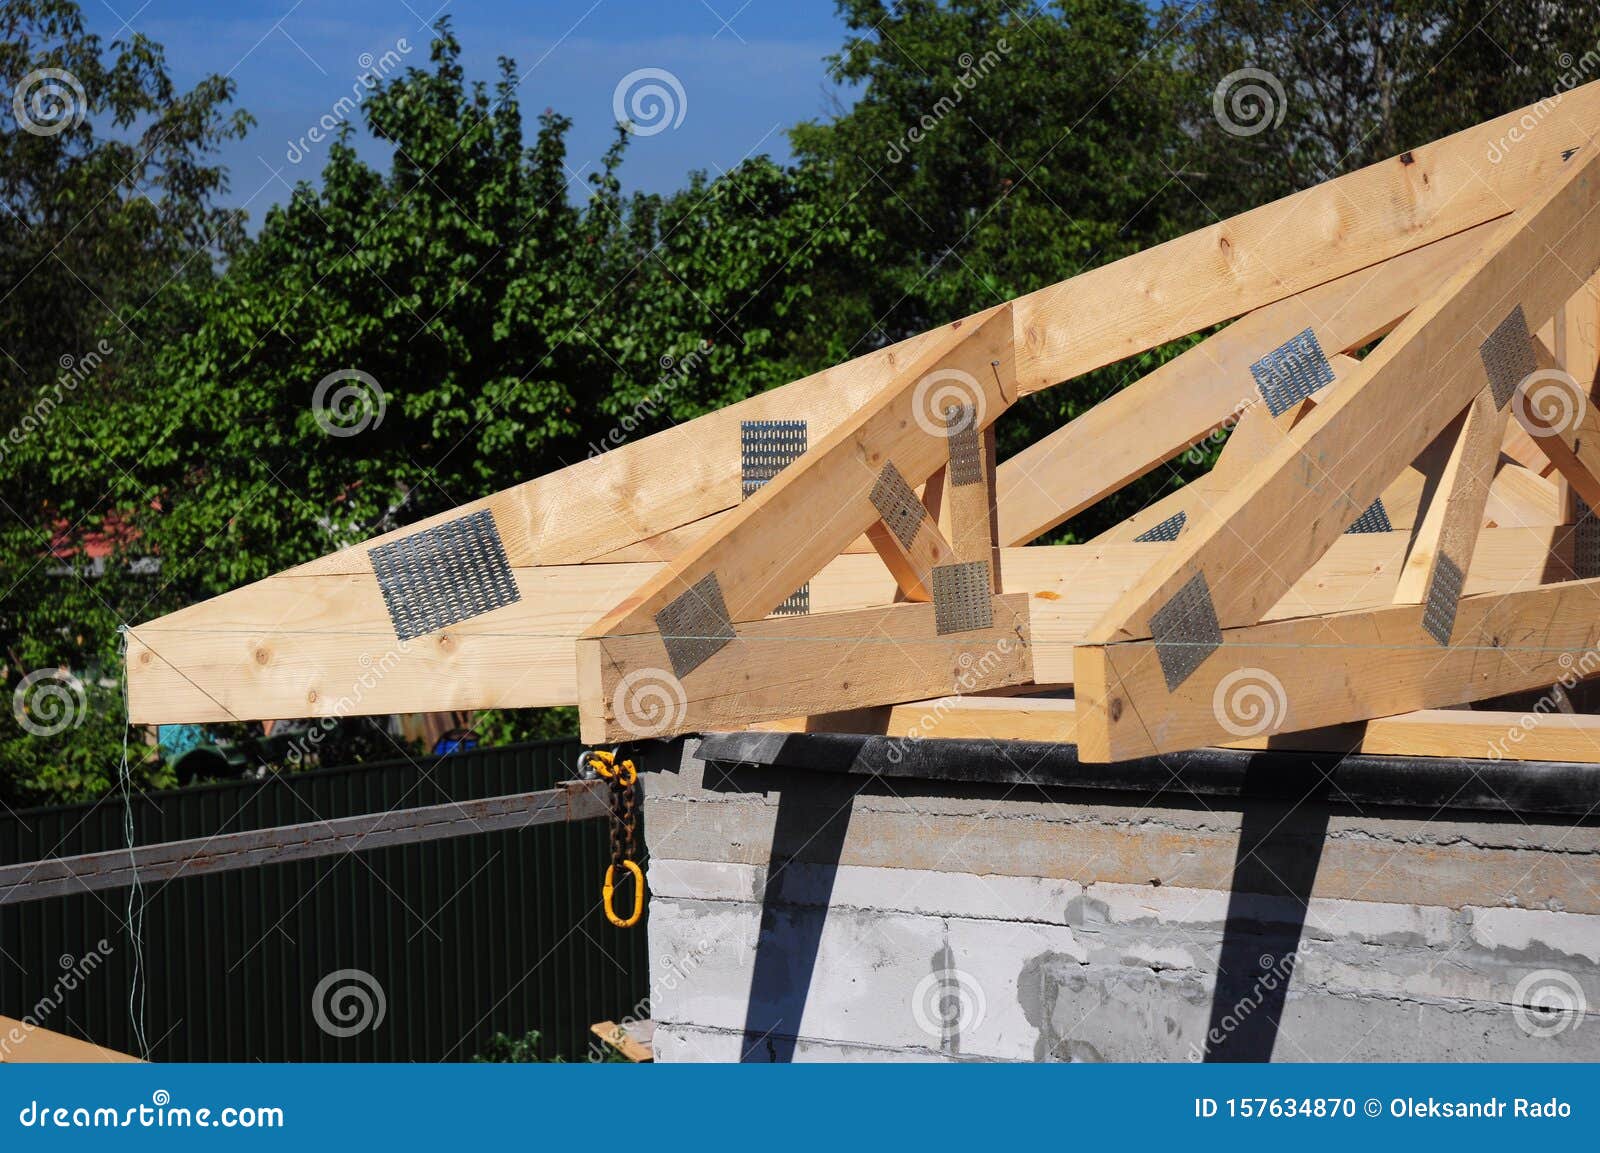 Roofing Construction House Corner Roof With Wooden Beams, Trusses, Frame, Timber And Measurement